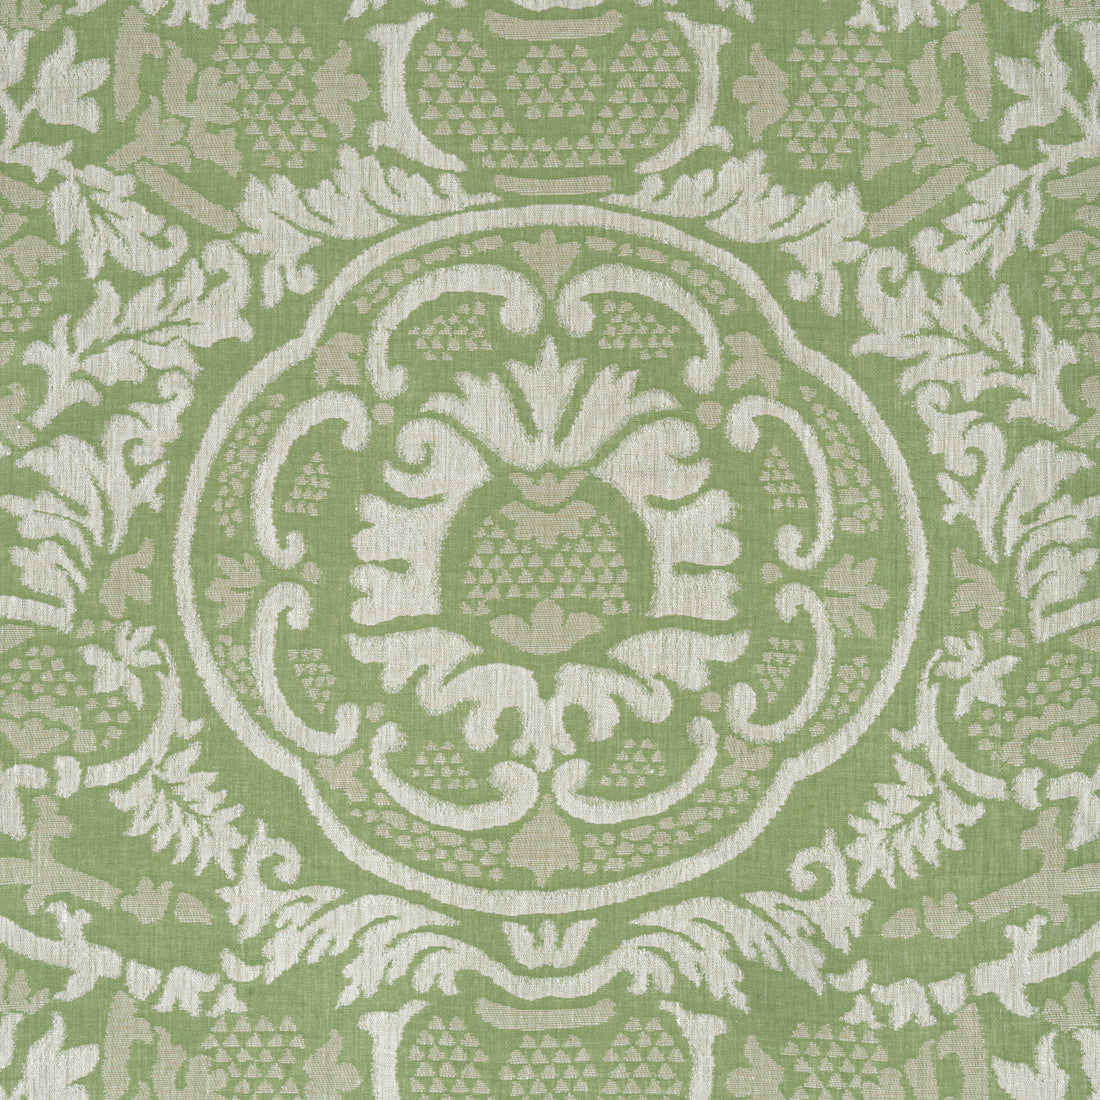 Earl Damask fabric in green color - pattern number W710838 - by Thibaut in the Heritage collection